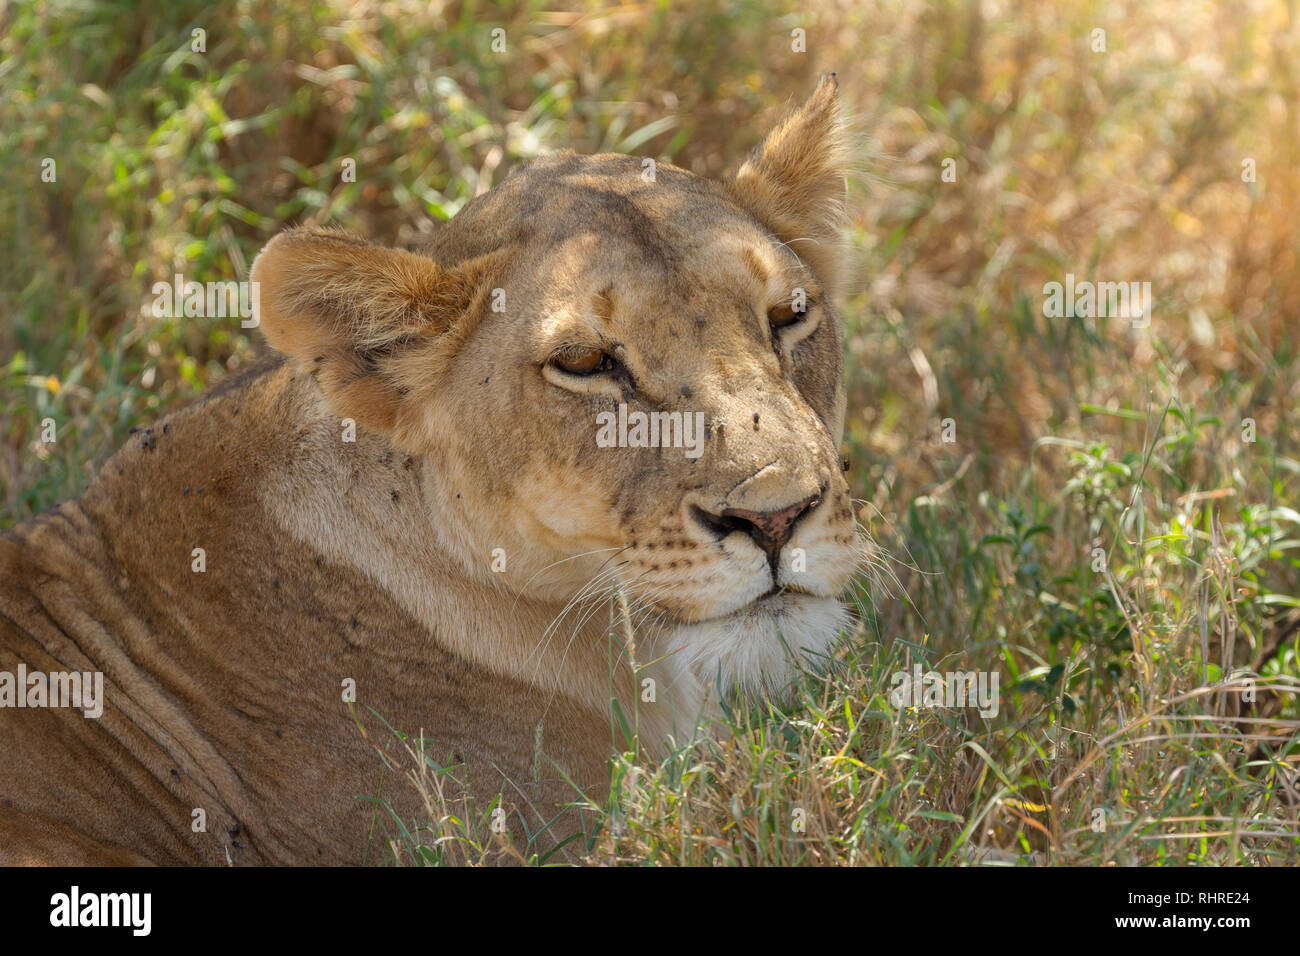 A single female lion in the shade during the day, alert and looking across,  Lewa Conservancy, Lewa, Kenya, Africa Stock Photo